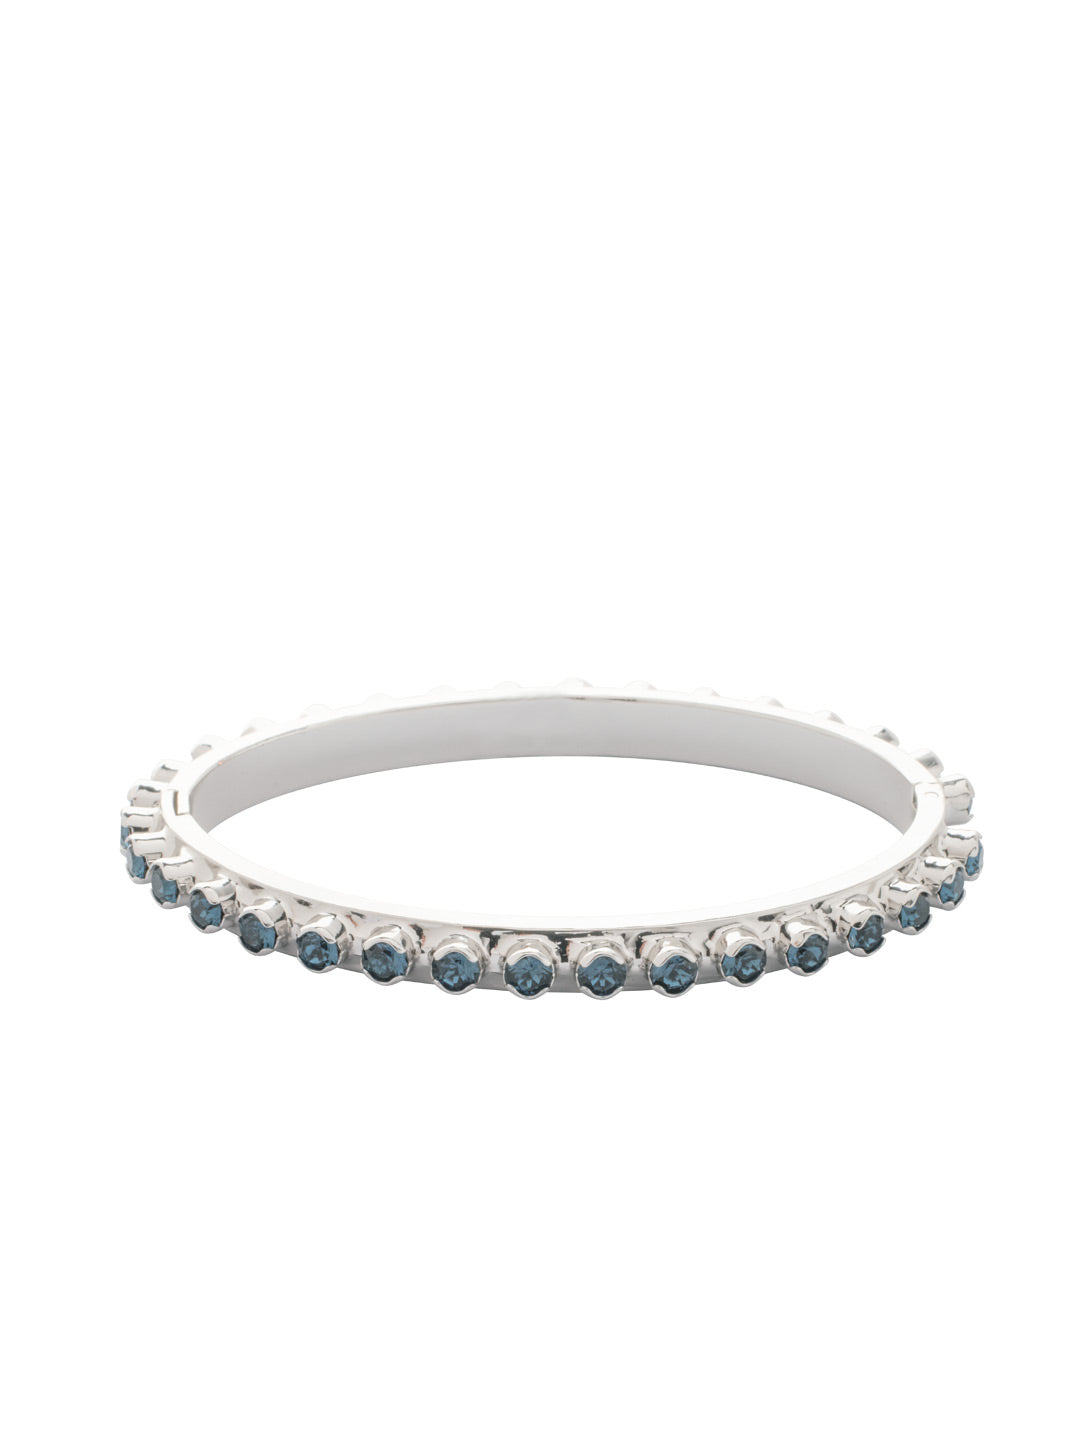 Mini Crystal Hinge Bangle Bracelet - BFL8PDASP - <p>The Mini Crystal Hinge Bangle Bracelet features a full crystal embellished cuff, secured with a hinge and snaps closed for a secure fit. From Sorrelli's Aspen SKY collection in our Palladium finish.</p>